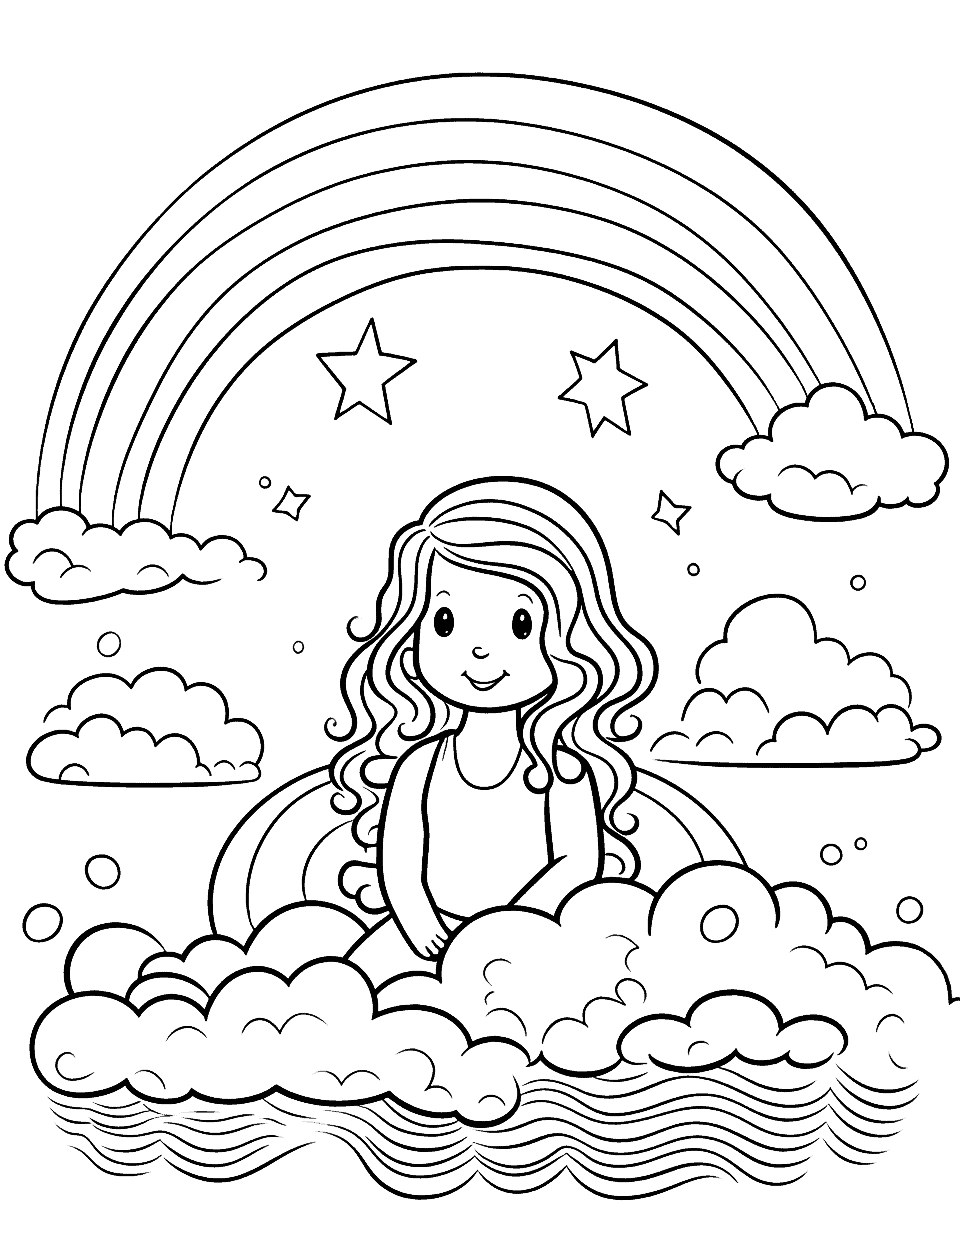 Mermaid Under the Rainbow Coloring Page - A beautiful mermaid sitting on a rock under a rainbow.